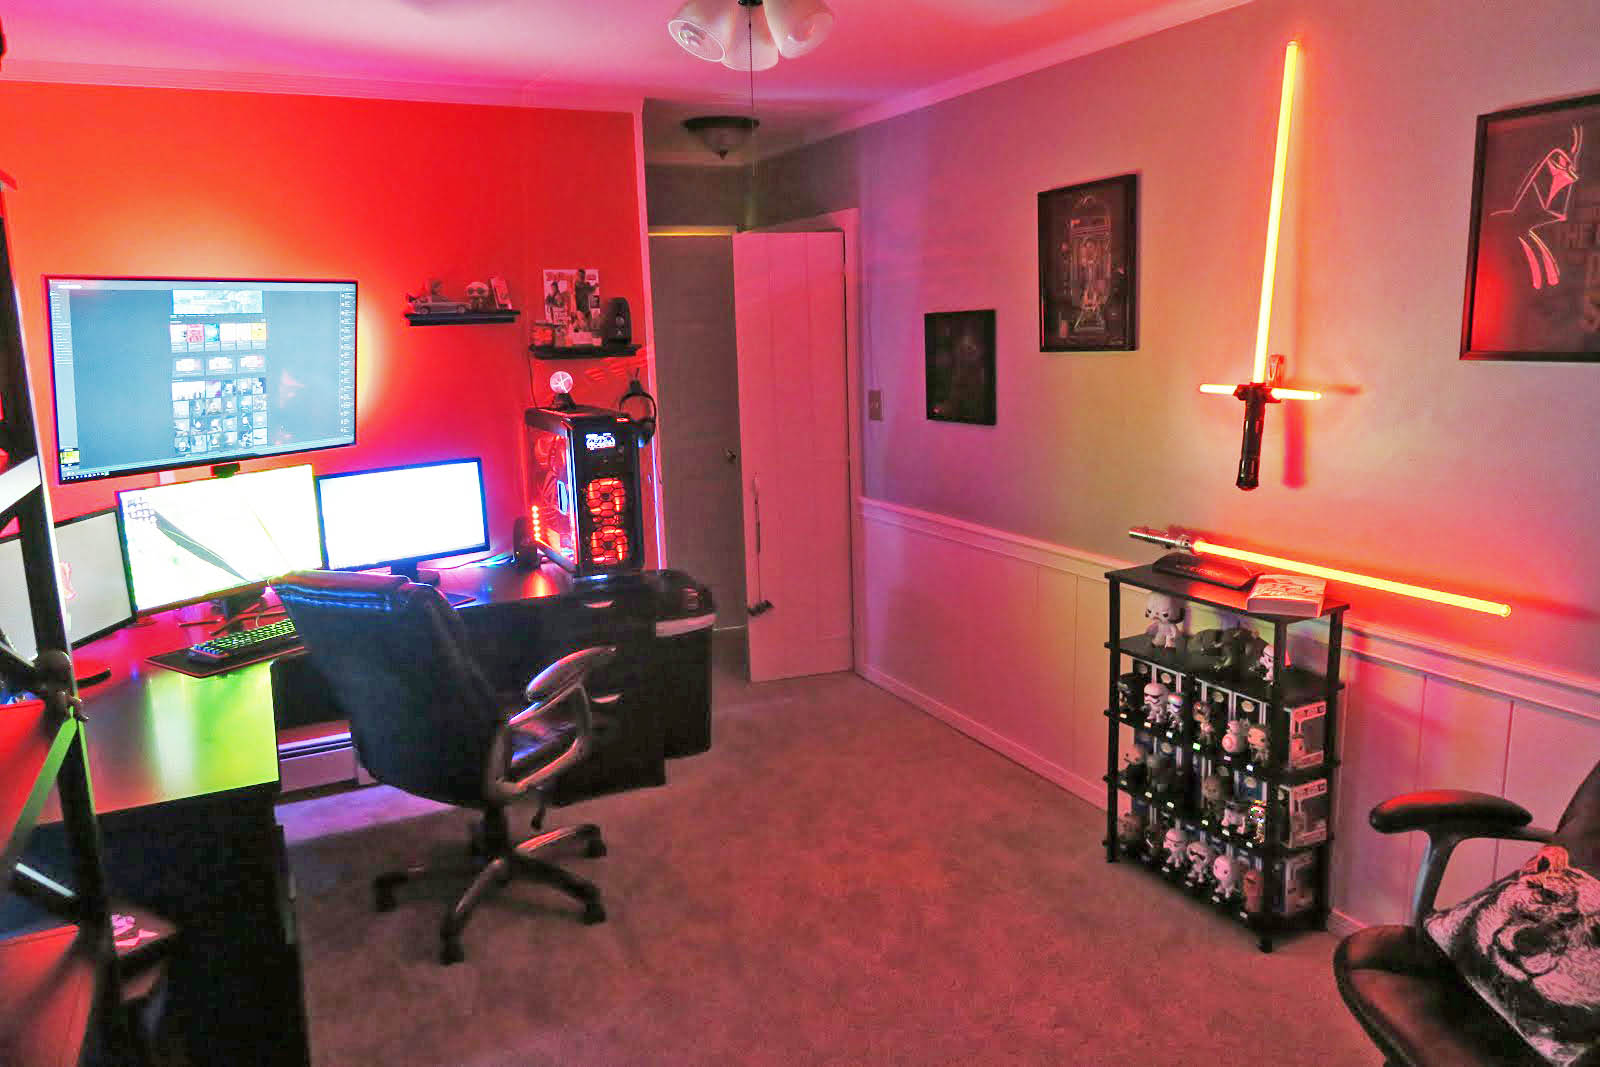 Premium Light Sabers and extra LEDs can make your computer gaming rig look this awesome.